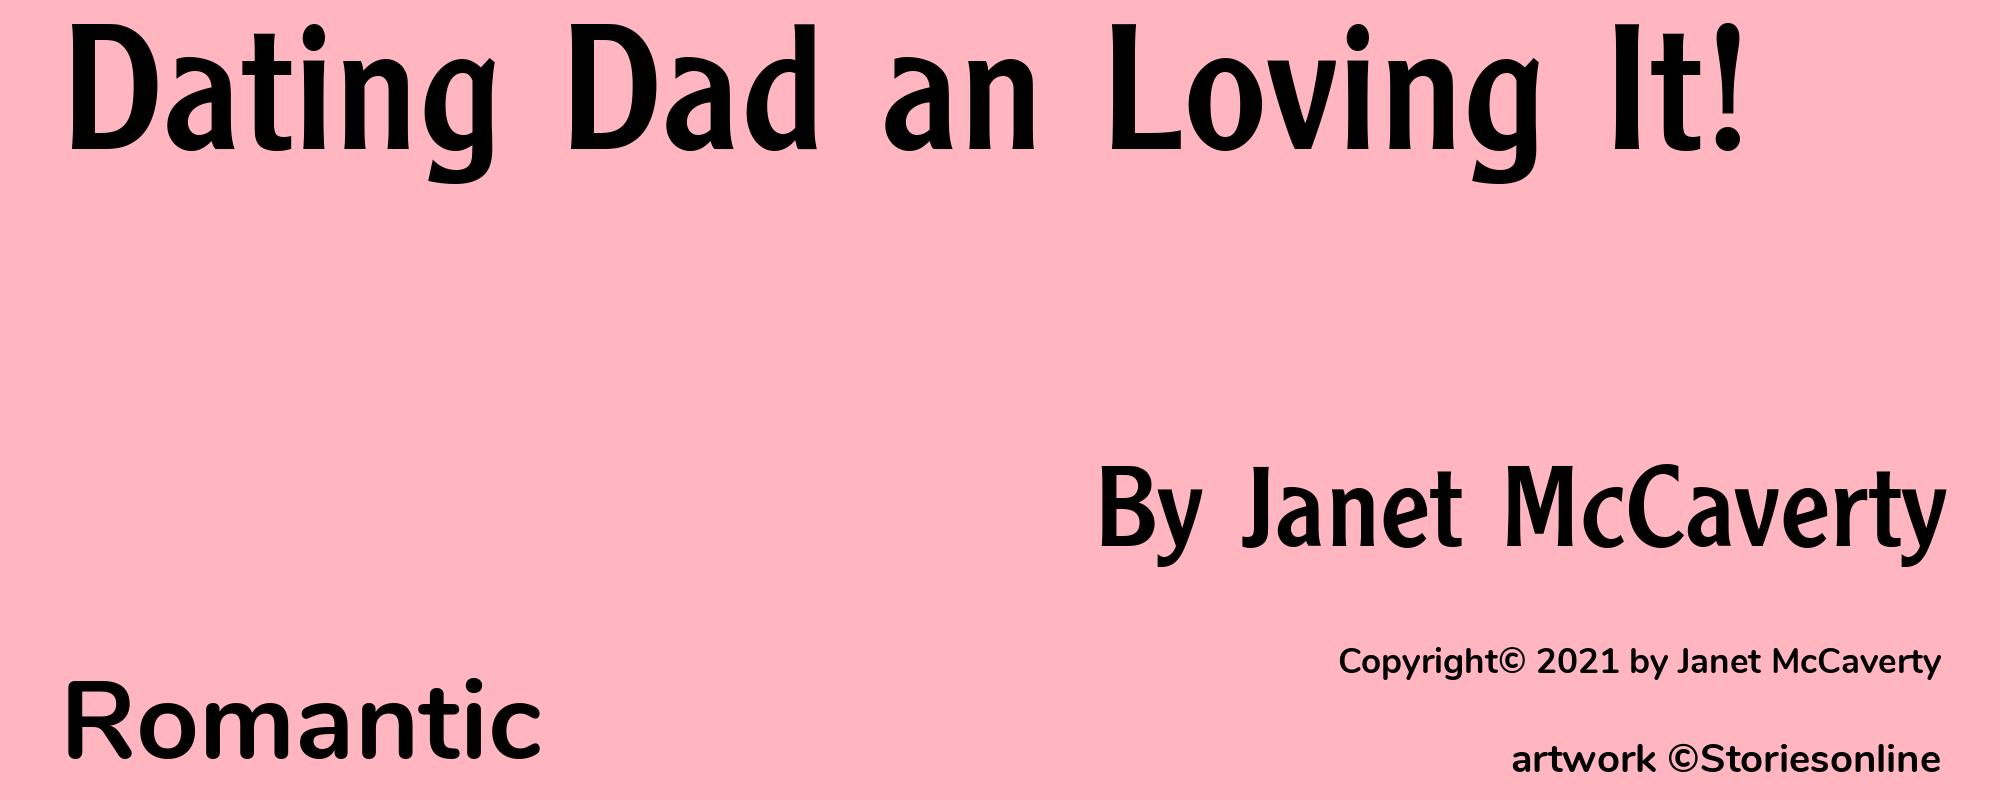 Dating Dad an Loving It! - Cover